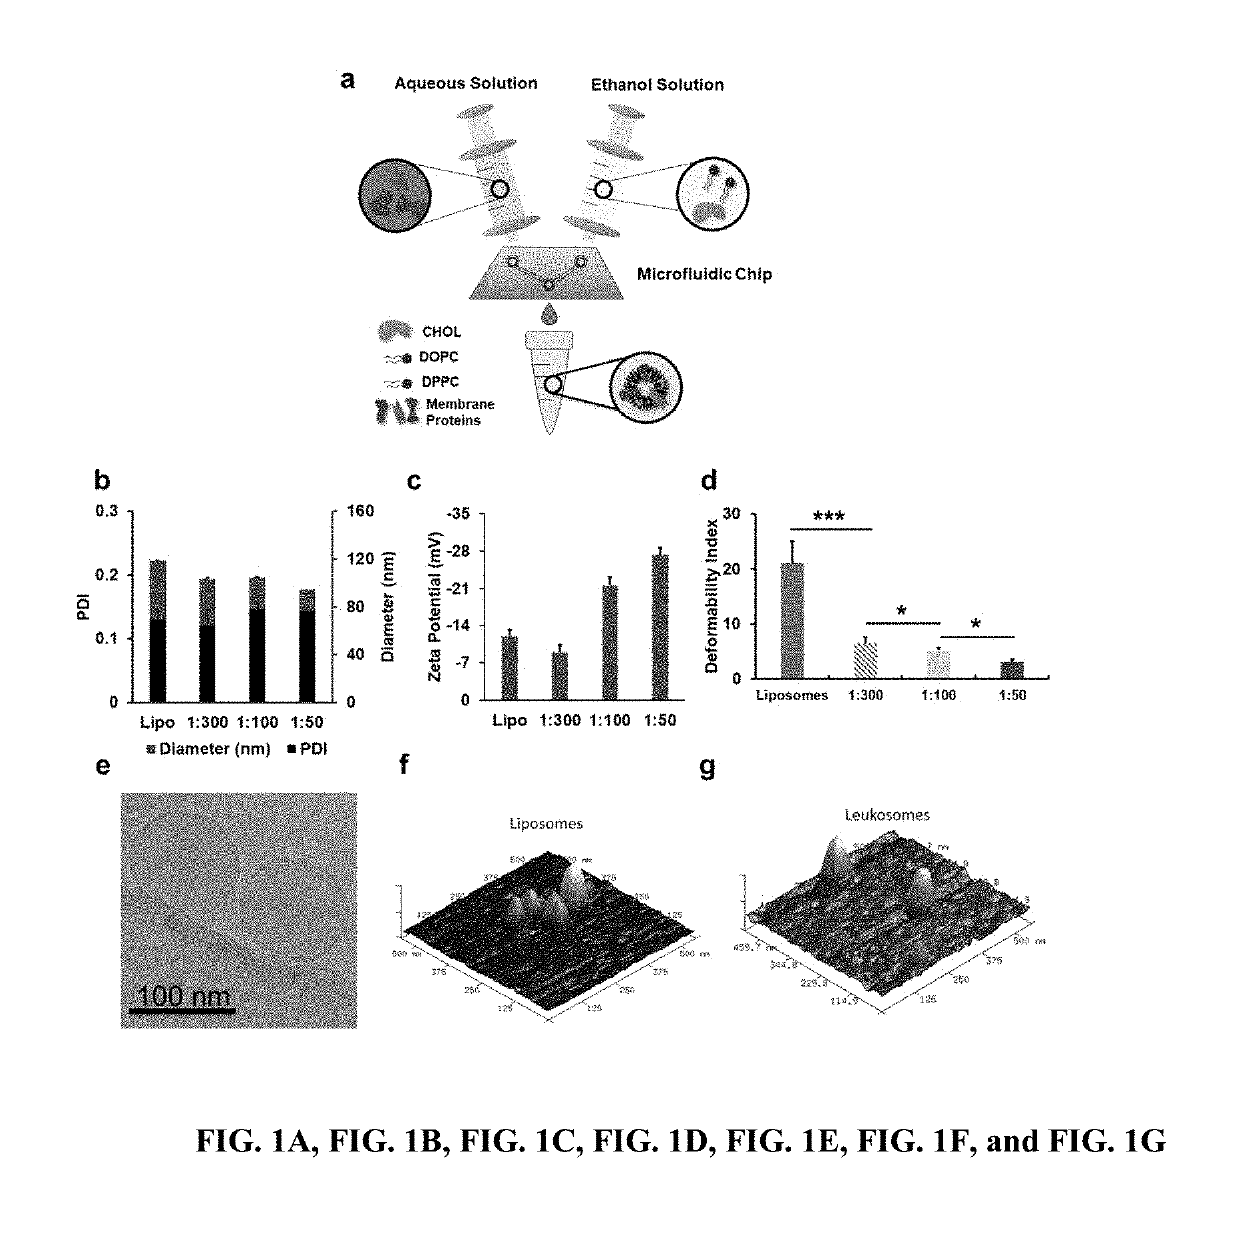 Microfluidic-formulated leukosome compositions and fabrication methods therefor